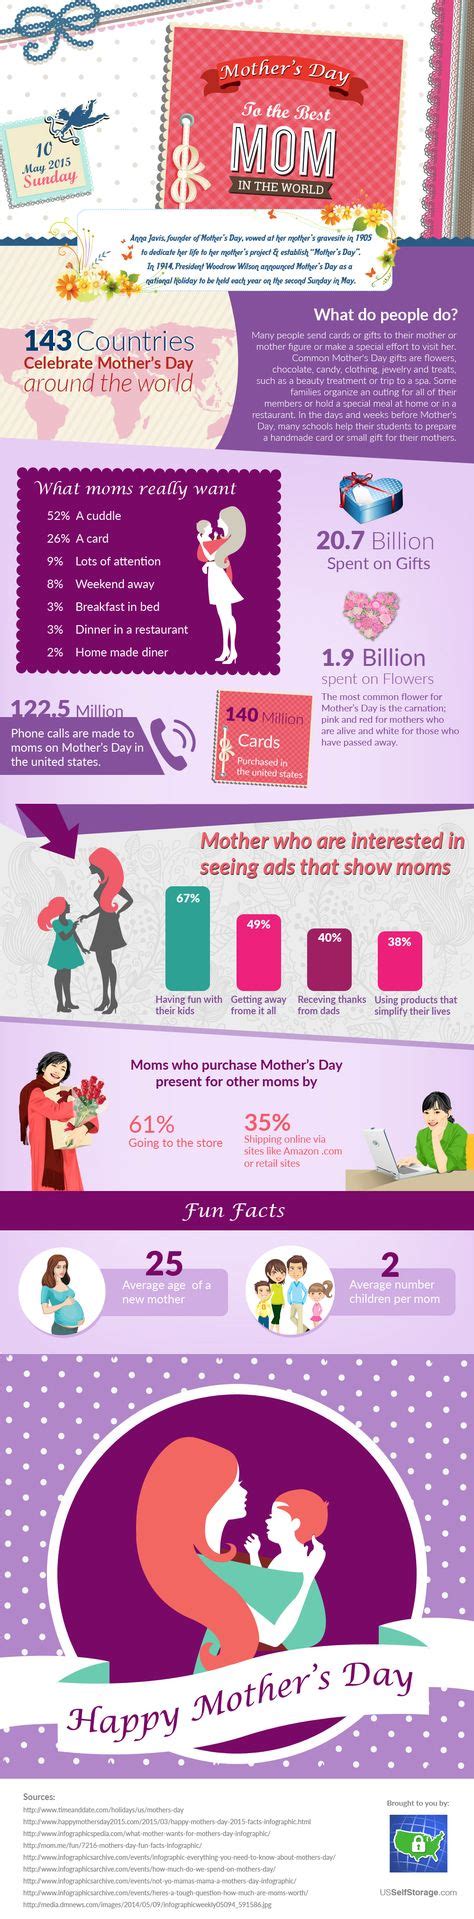 18 mothers day momfographics ideas mothers day infographic mother